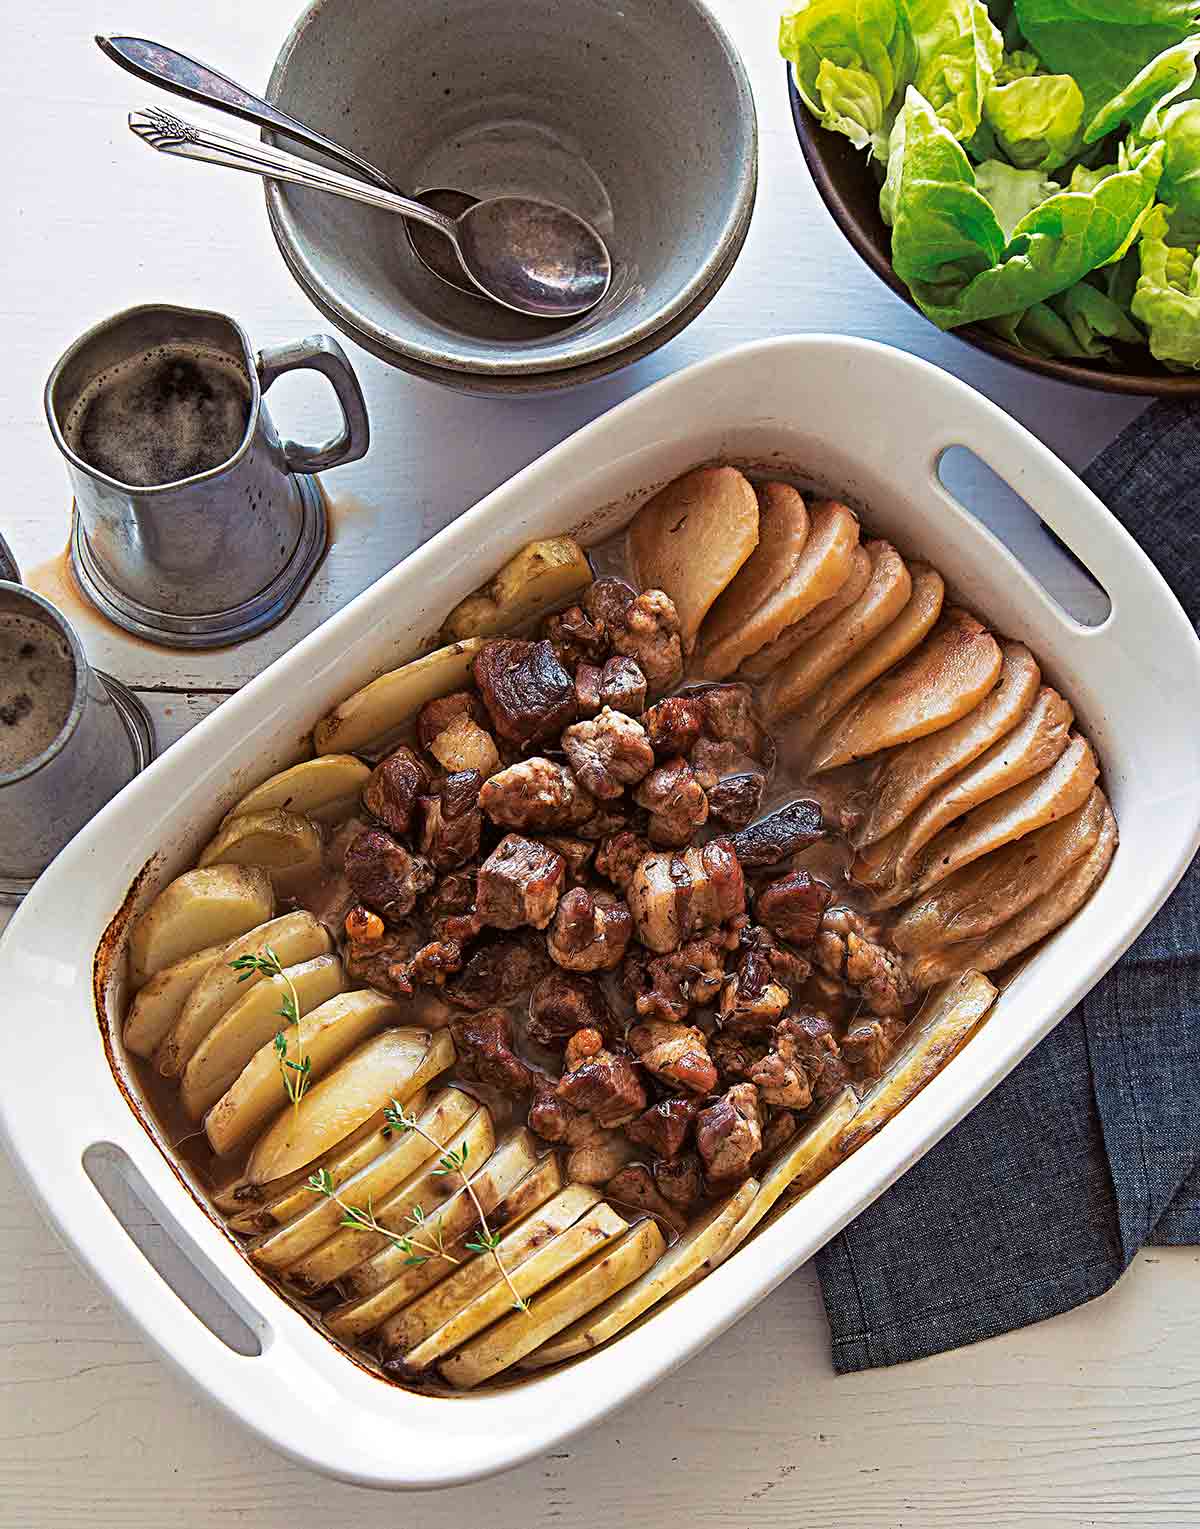 A white casserole dish of roast pork, potatoes and pears with a bowl of salad and two empty bowls with spoons beside it.